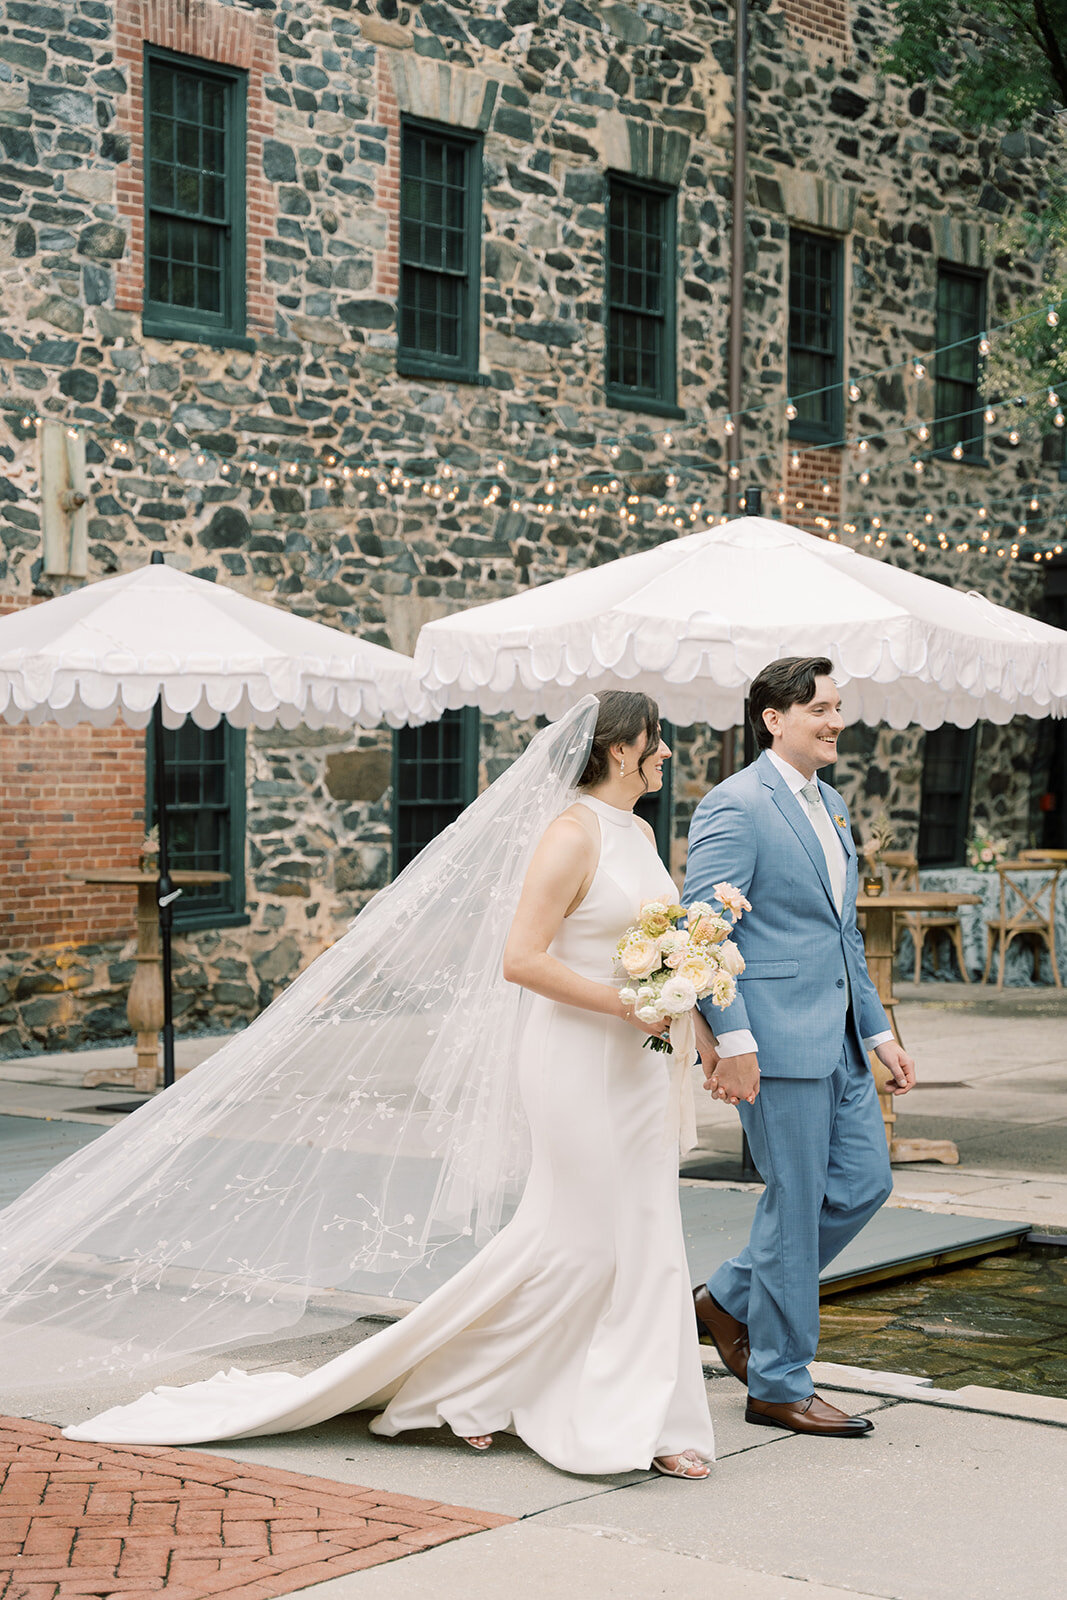 Bride and groom portrait walking outside the Washington mill dye house with white umbrellas in the background.